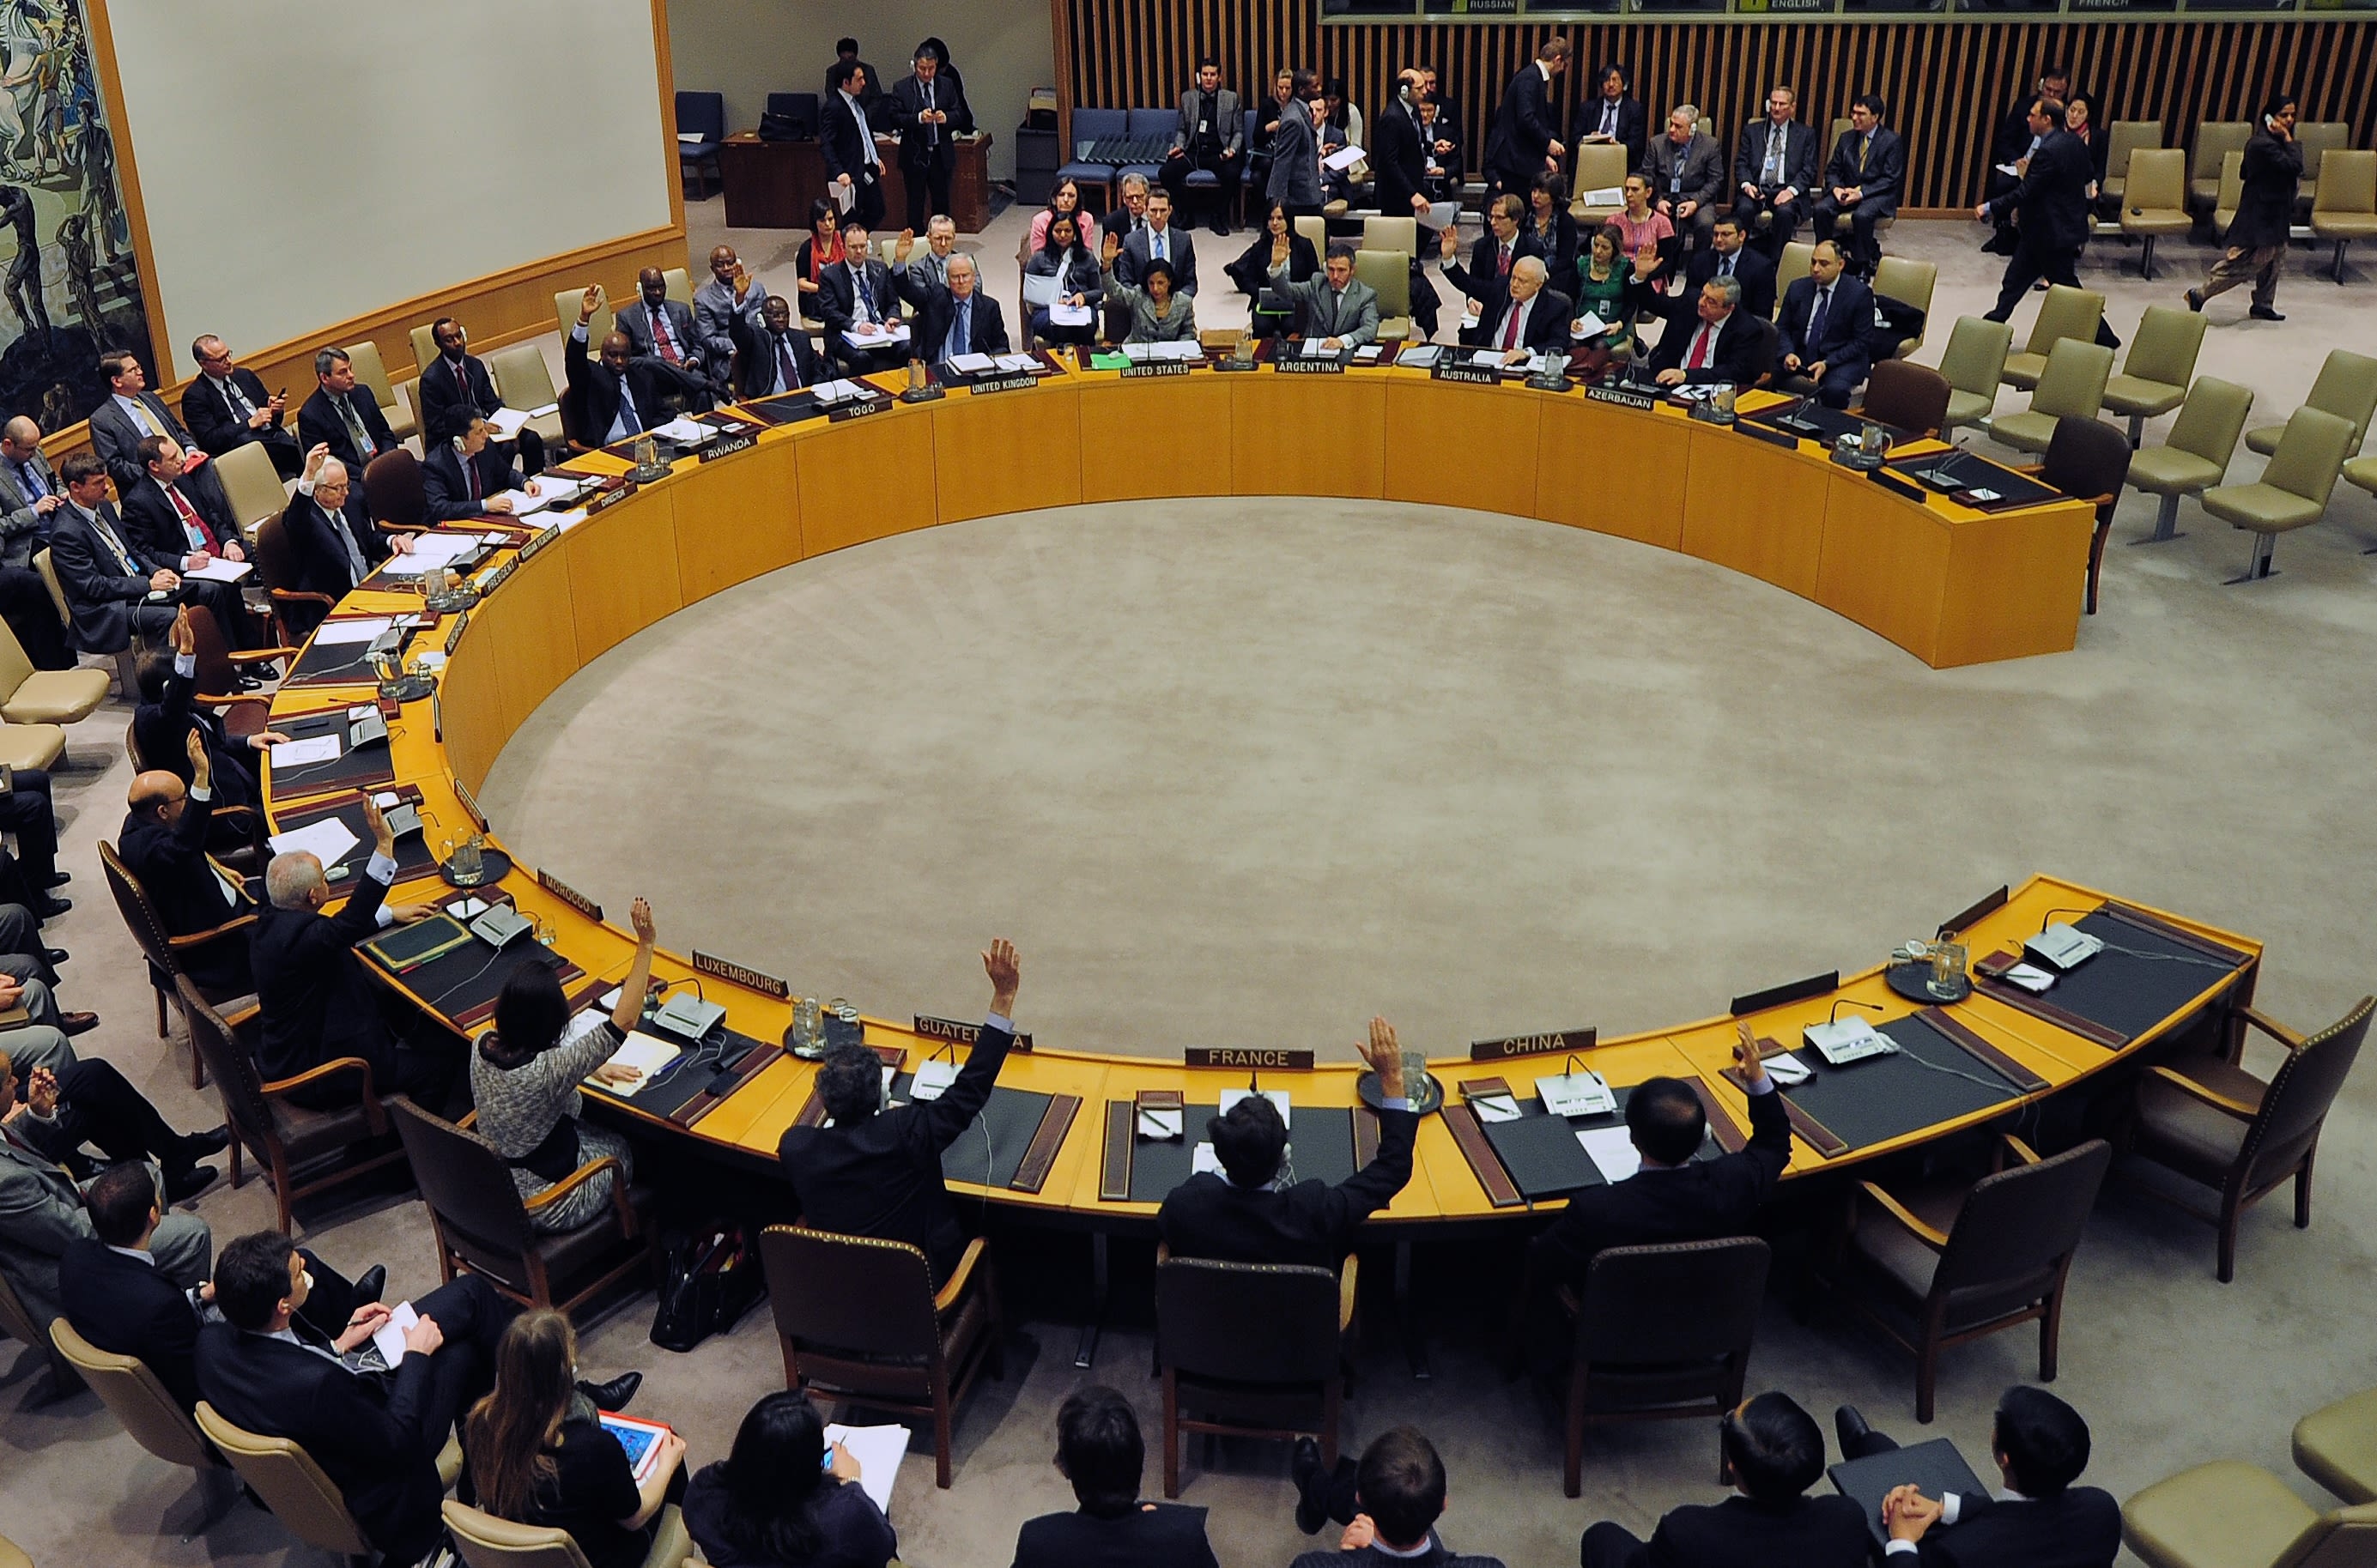 The document regarding Iran's attack on Israel has been sent to the UN Security Council